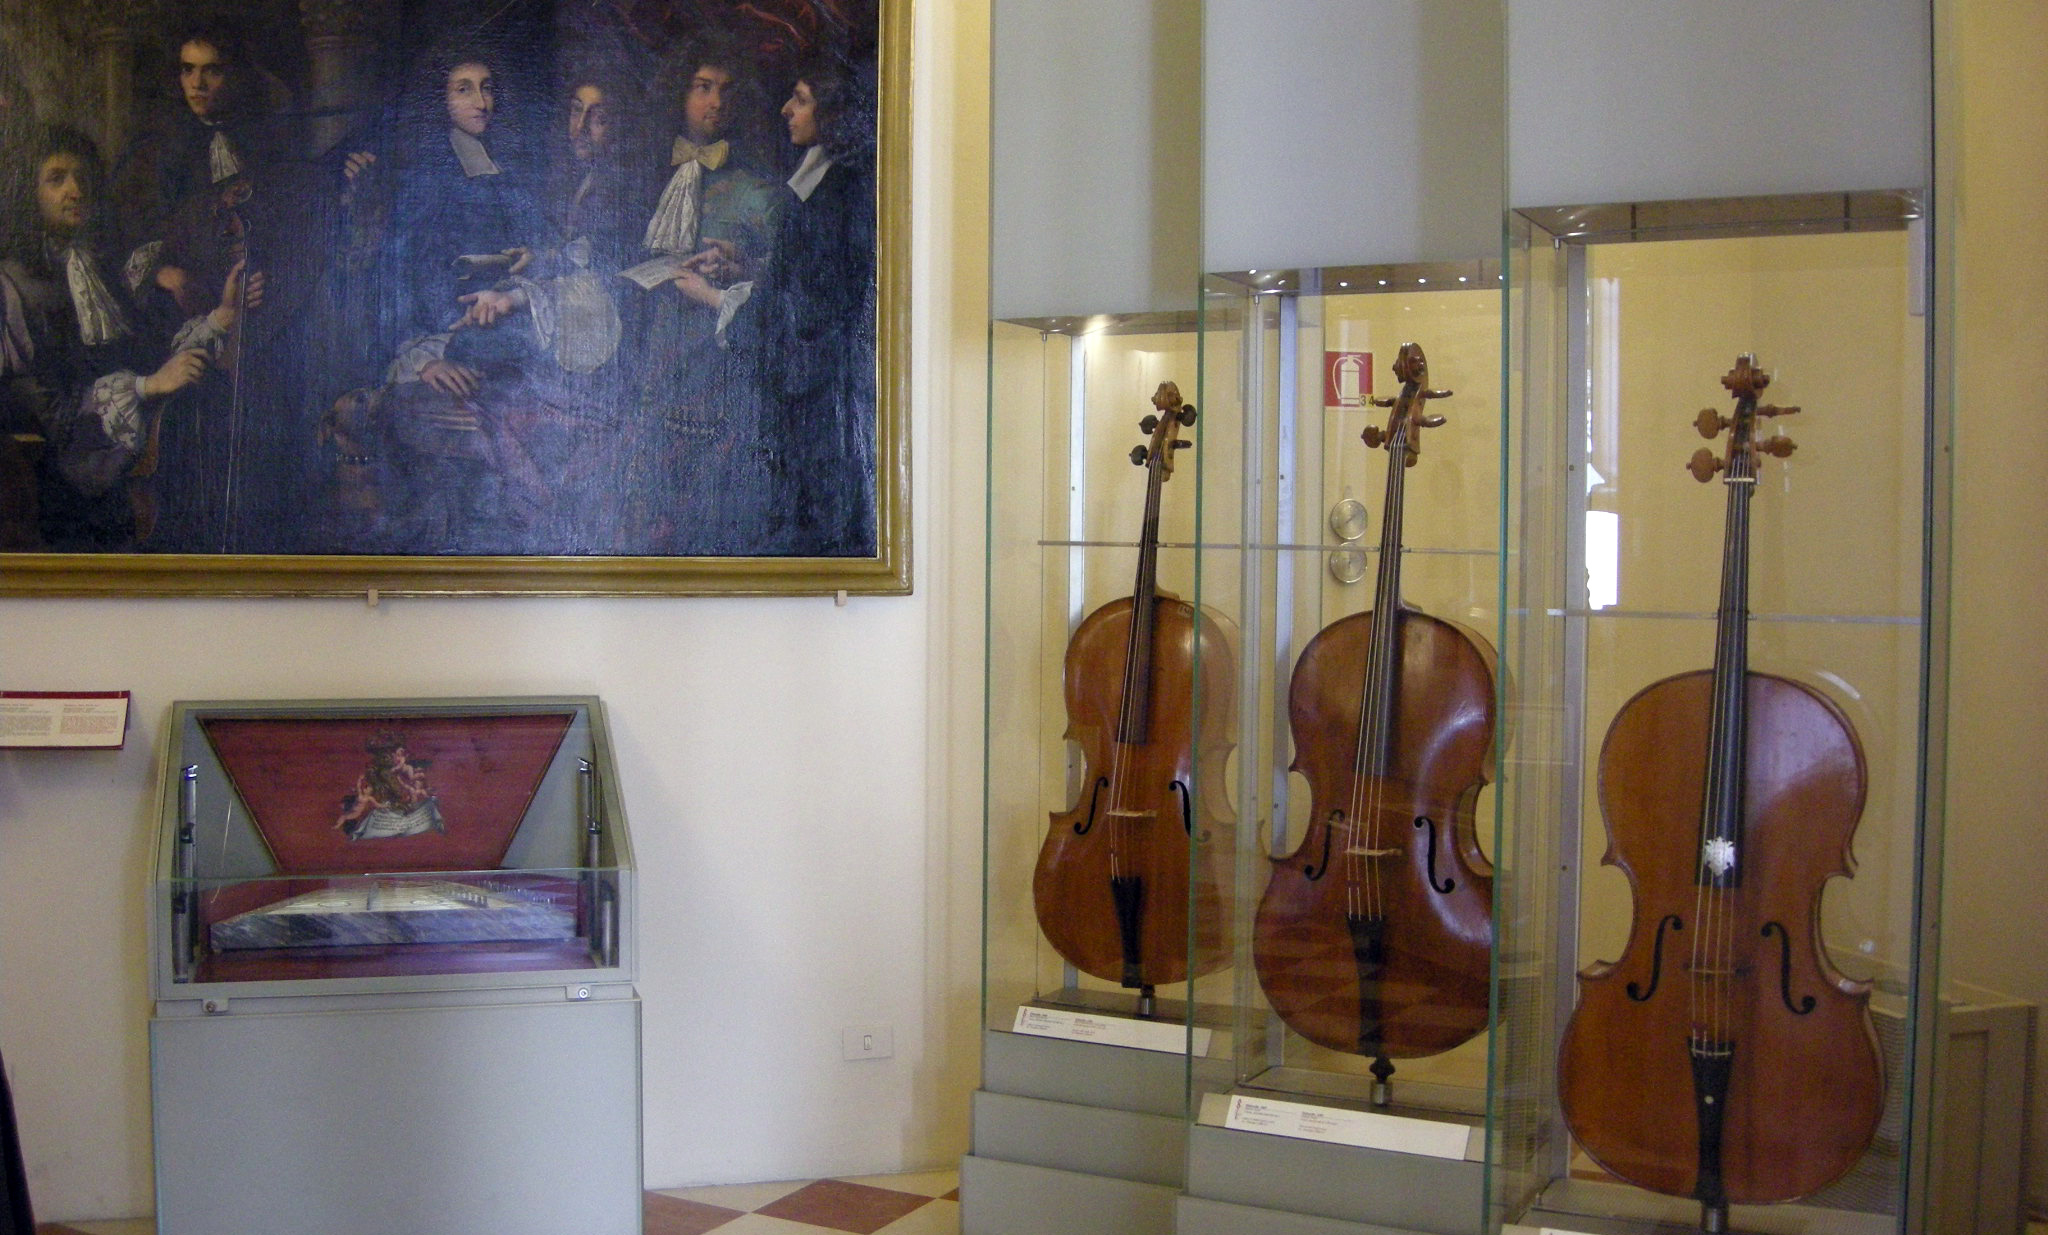 Museum of musical instruments